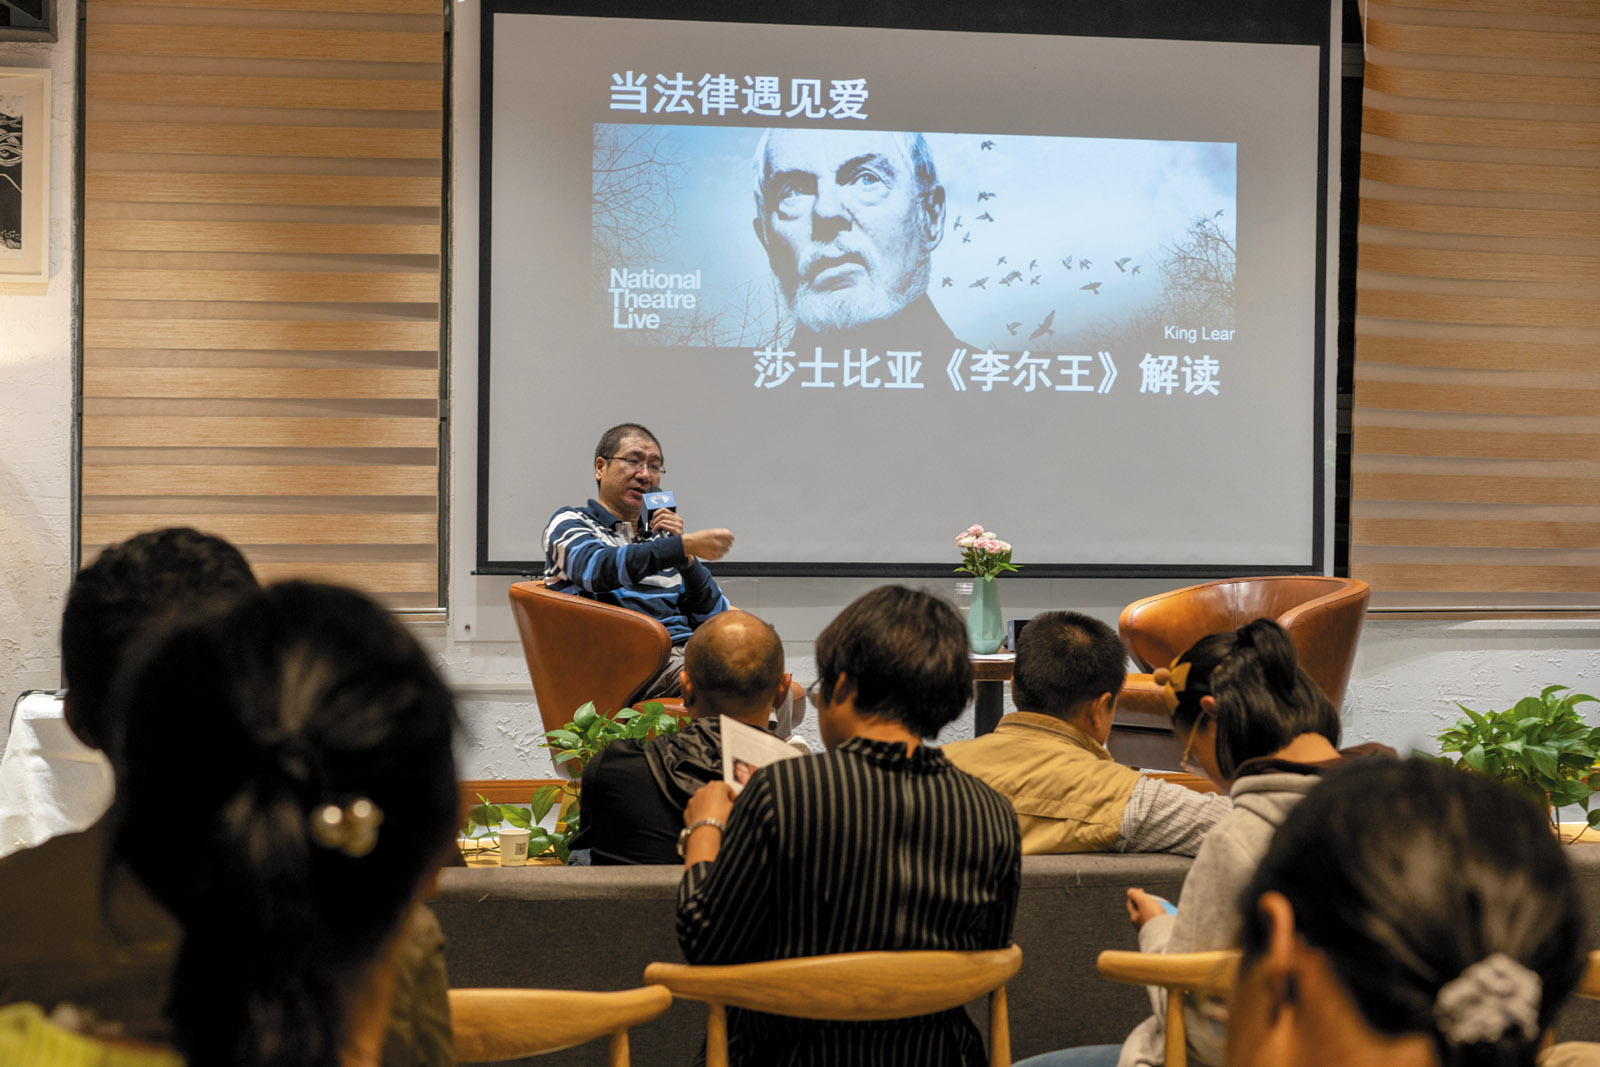 Chen Hongguo lecturing on King Lear at Zhiwuzhi, an arts and culture space in Xi’an, Shaanxi province, China, 2018